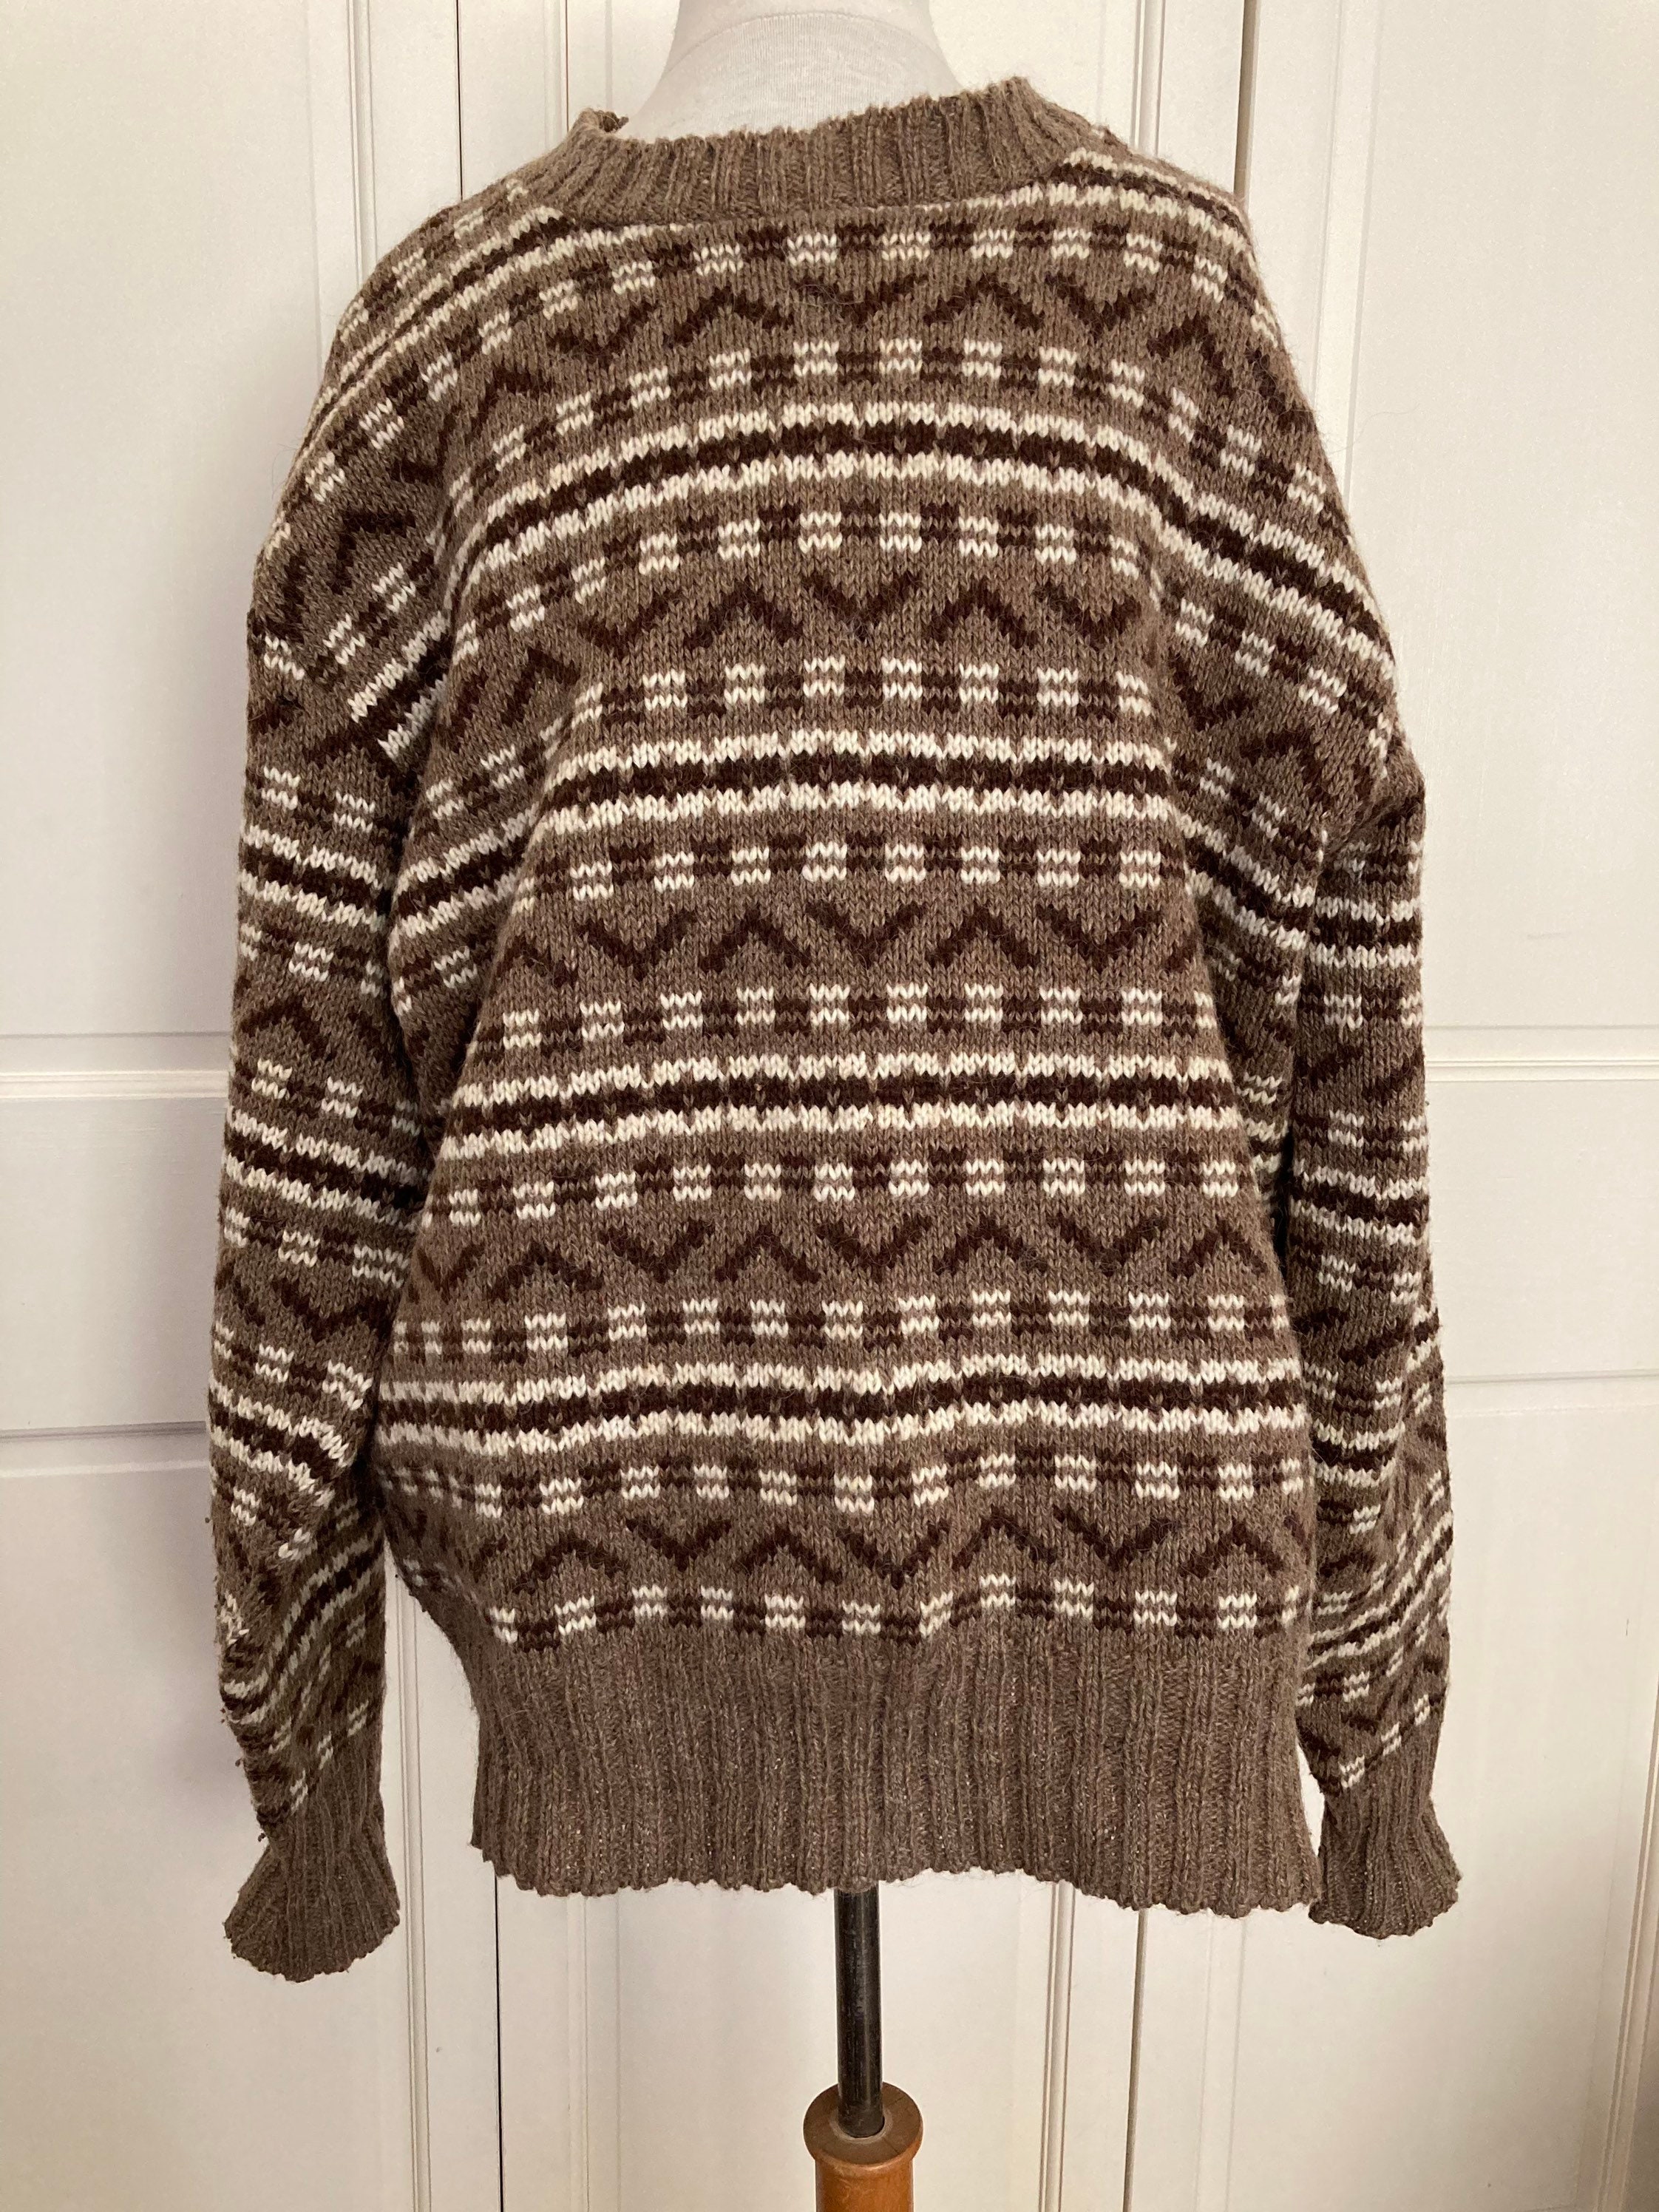 Vintage Wool Nordic Sweater, Size XL, Shetland Wool, Brown and Cream ...